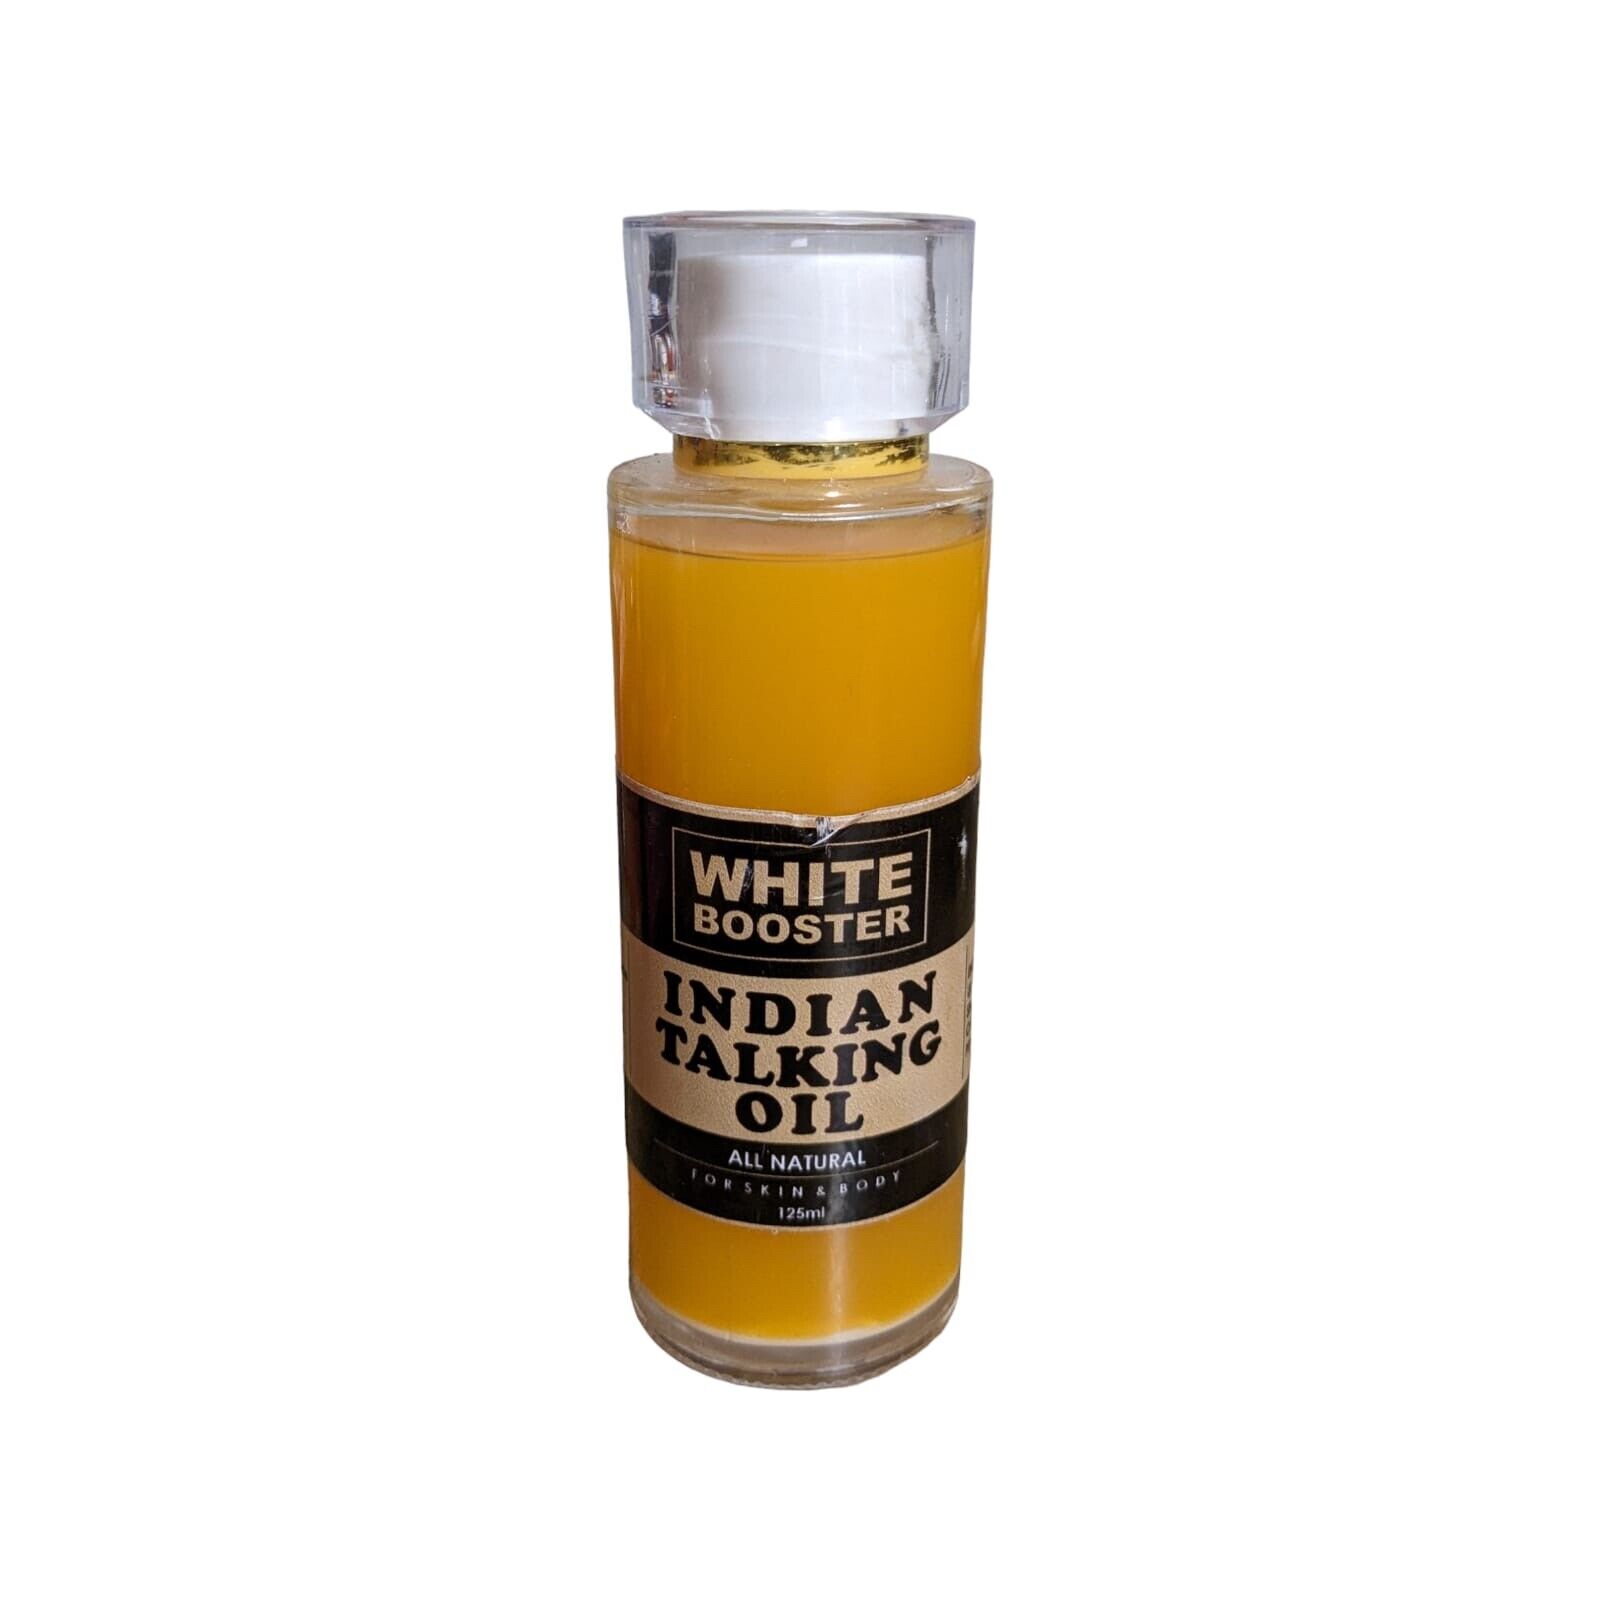 White Booster Indian talking oil 125ml